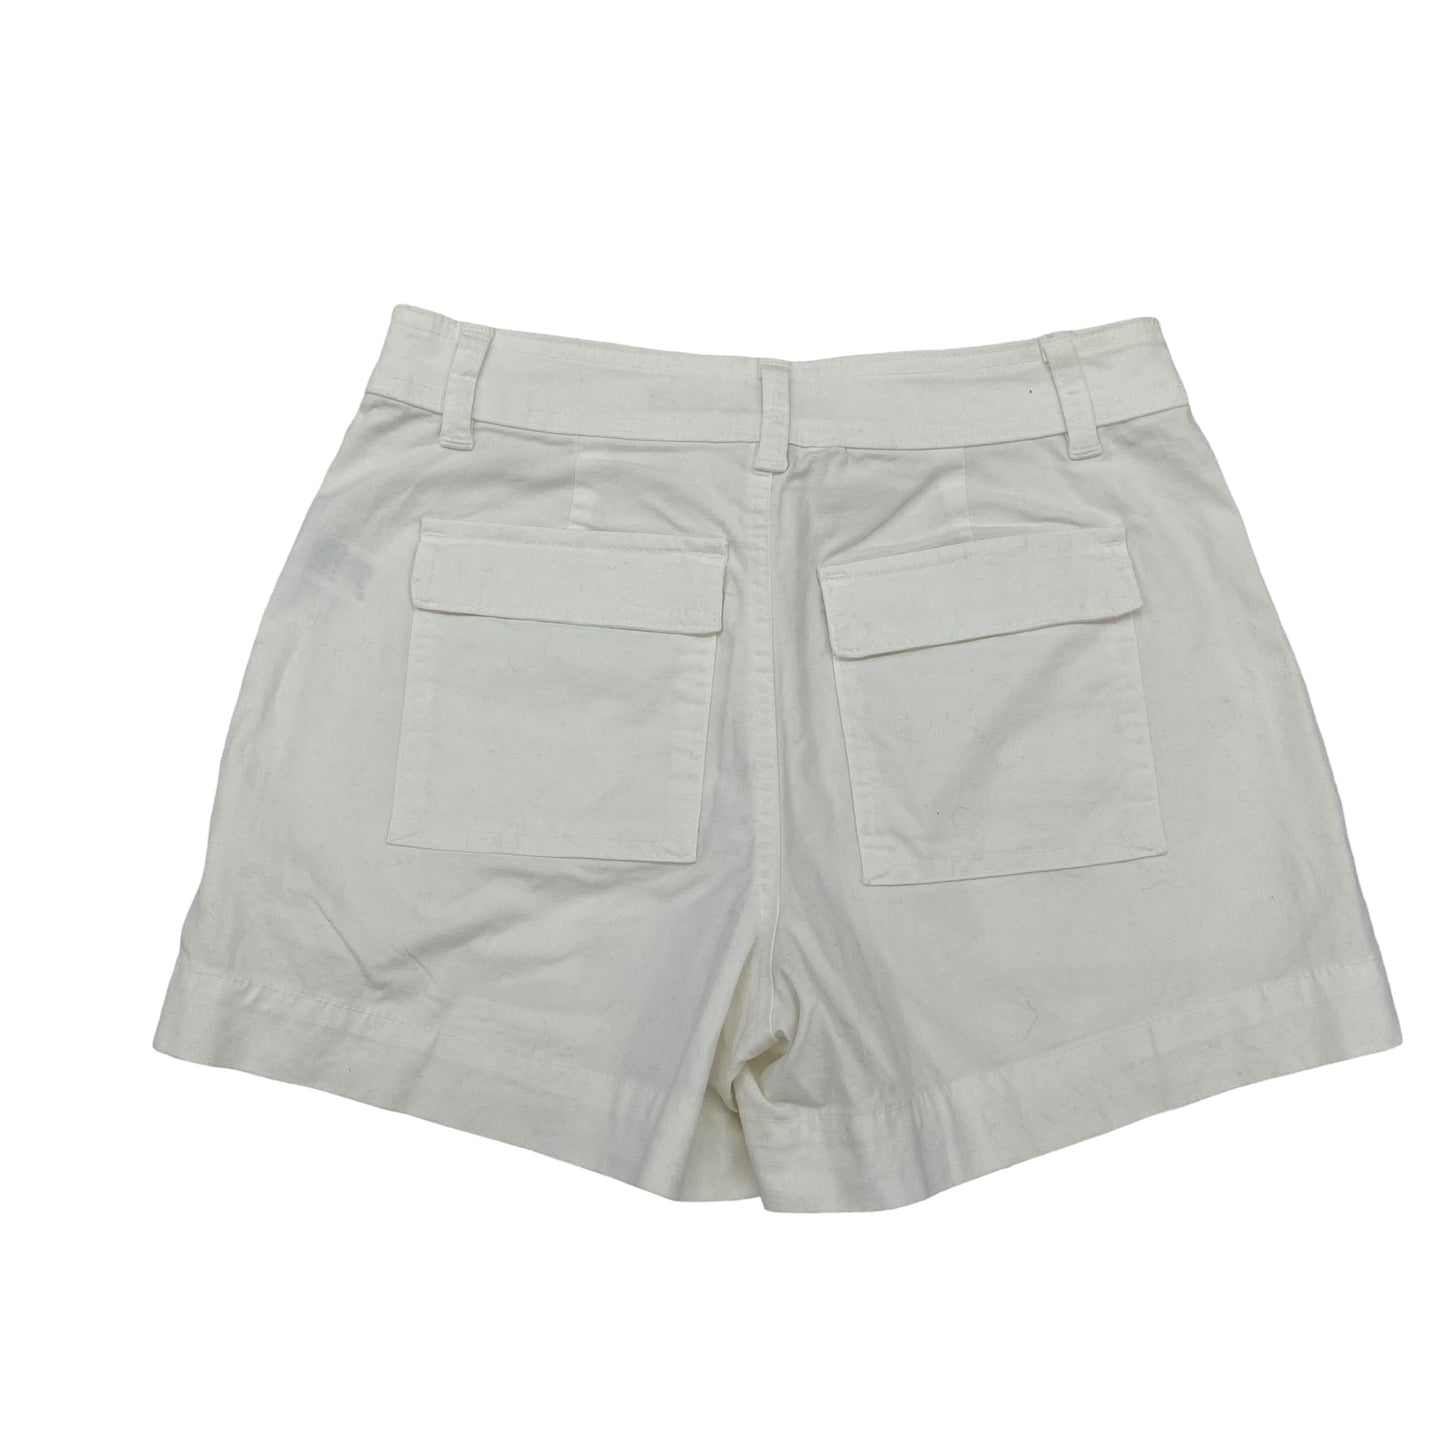 CREAM A NEW DAY SHORTS, Size 2